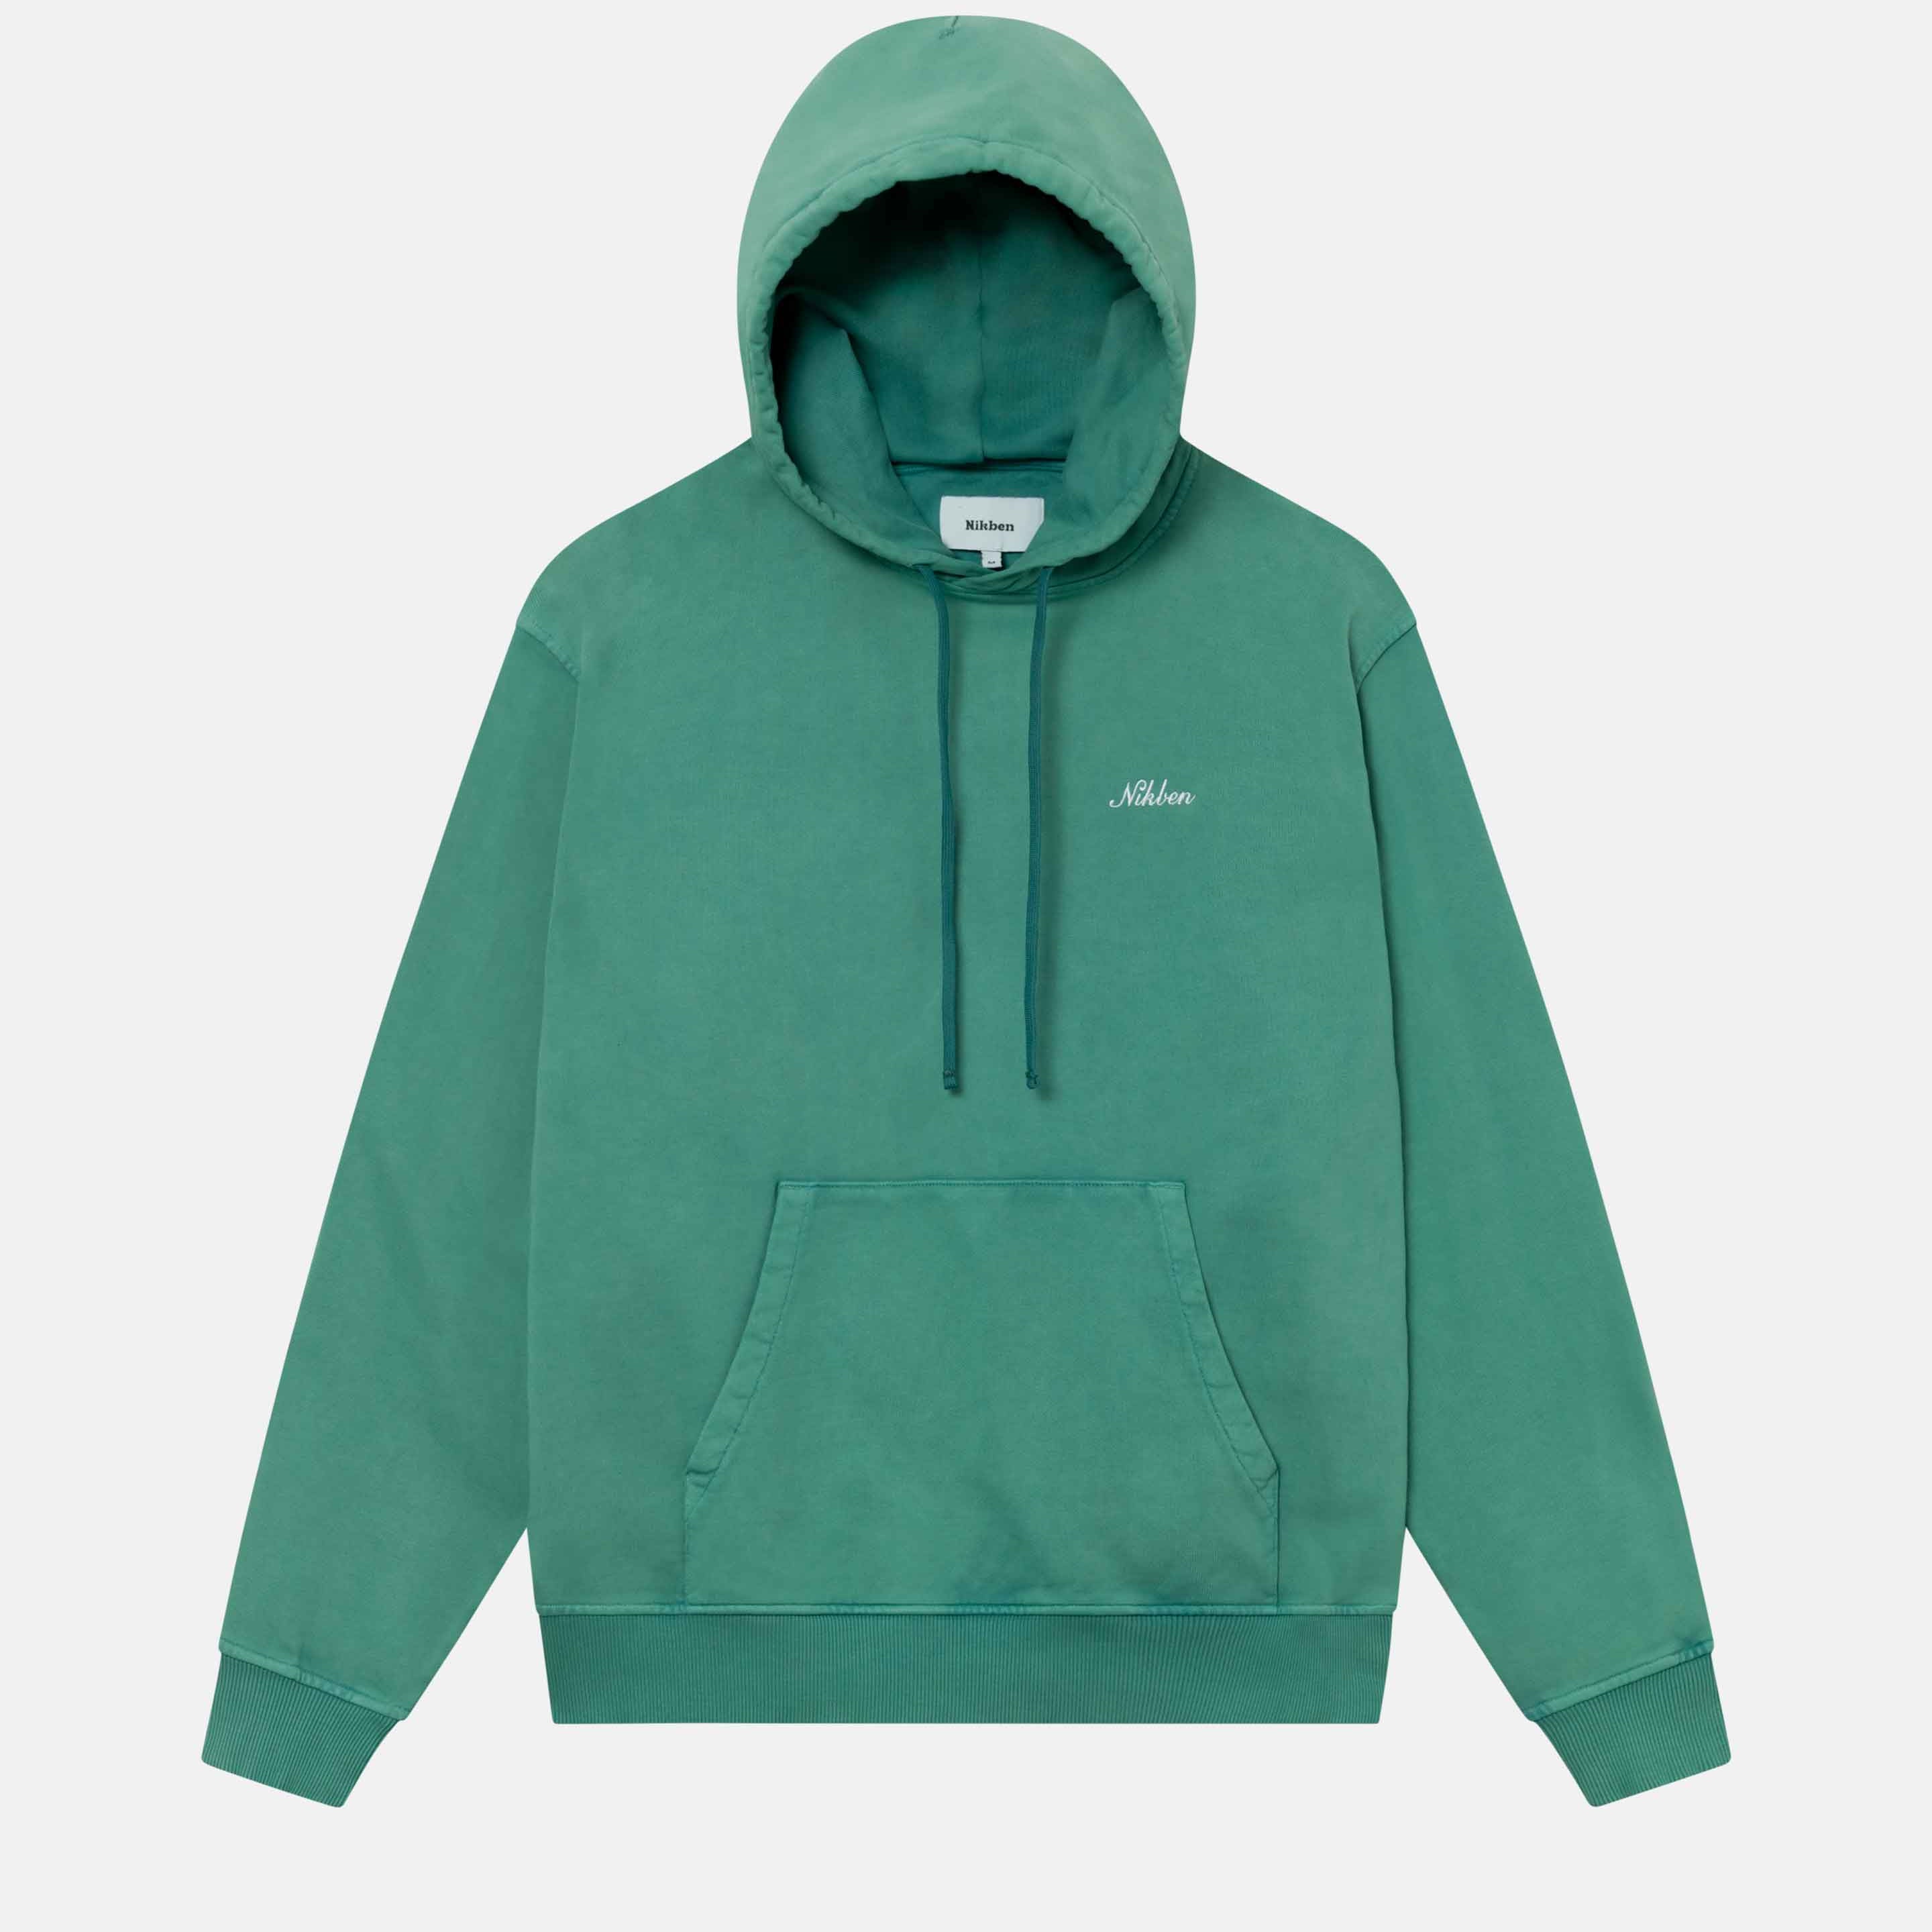 A green hoodie with an embroidered Nikben script logo